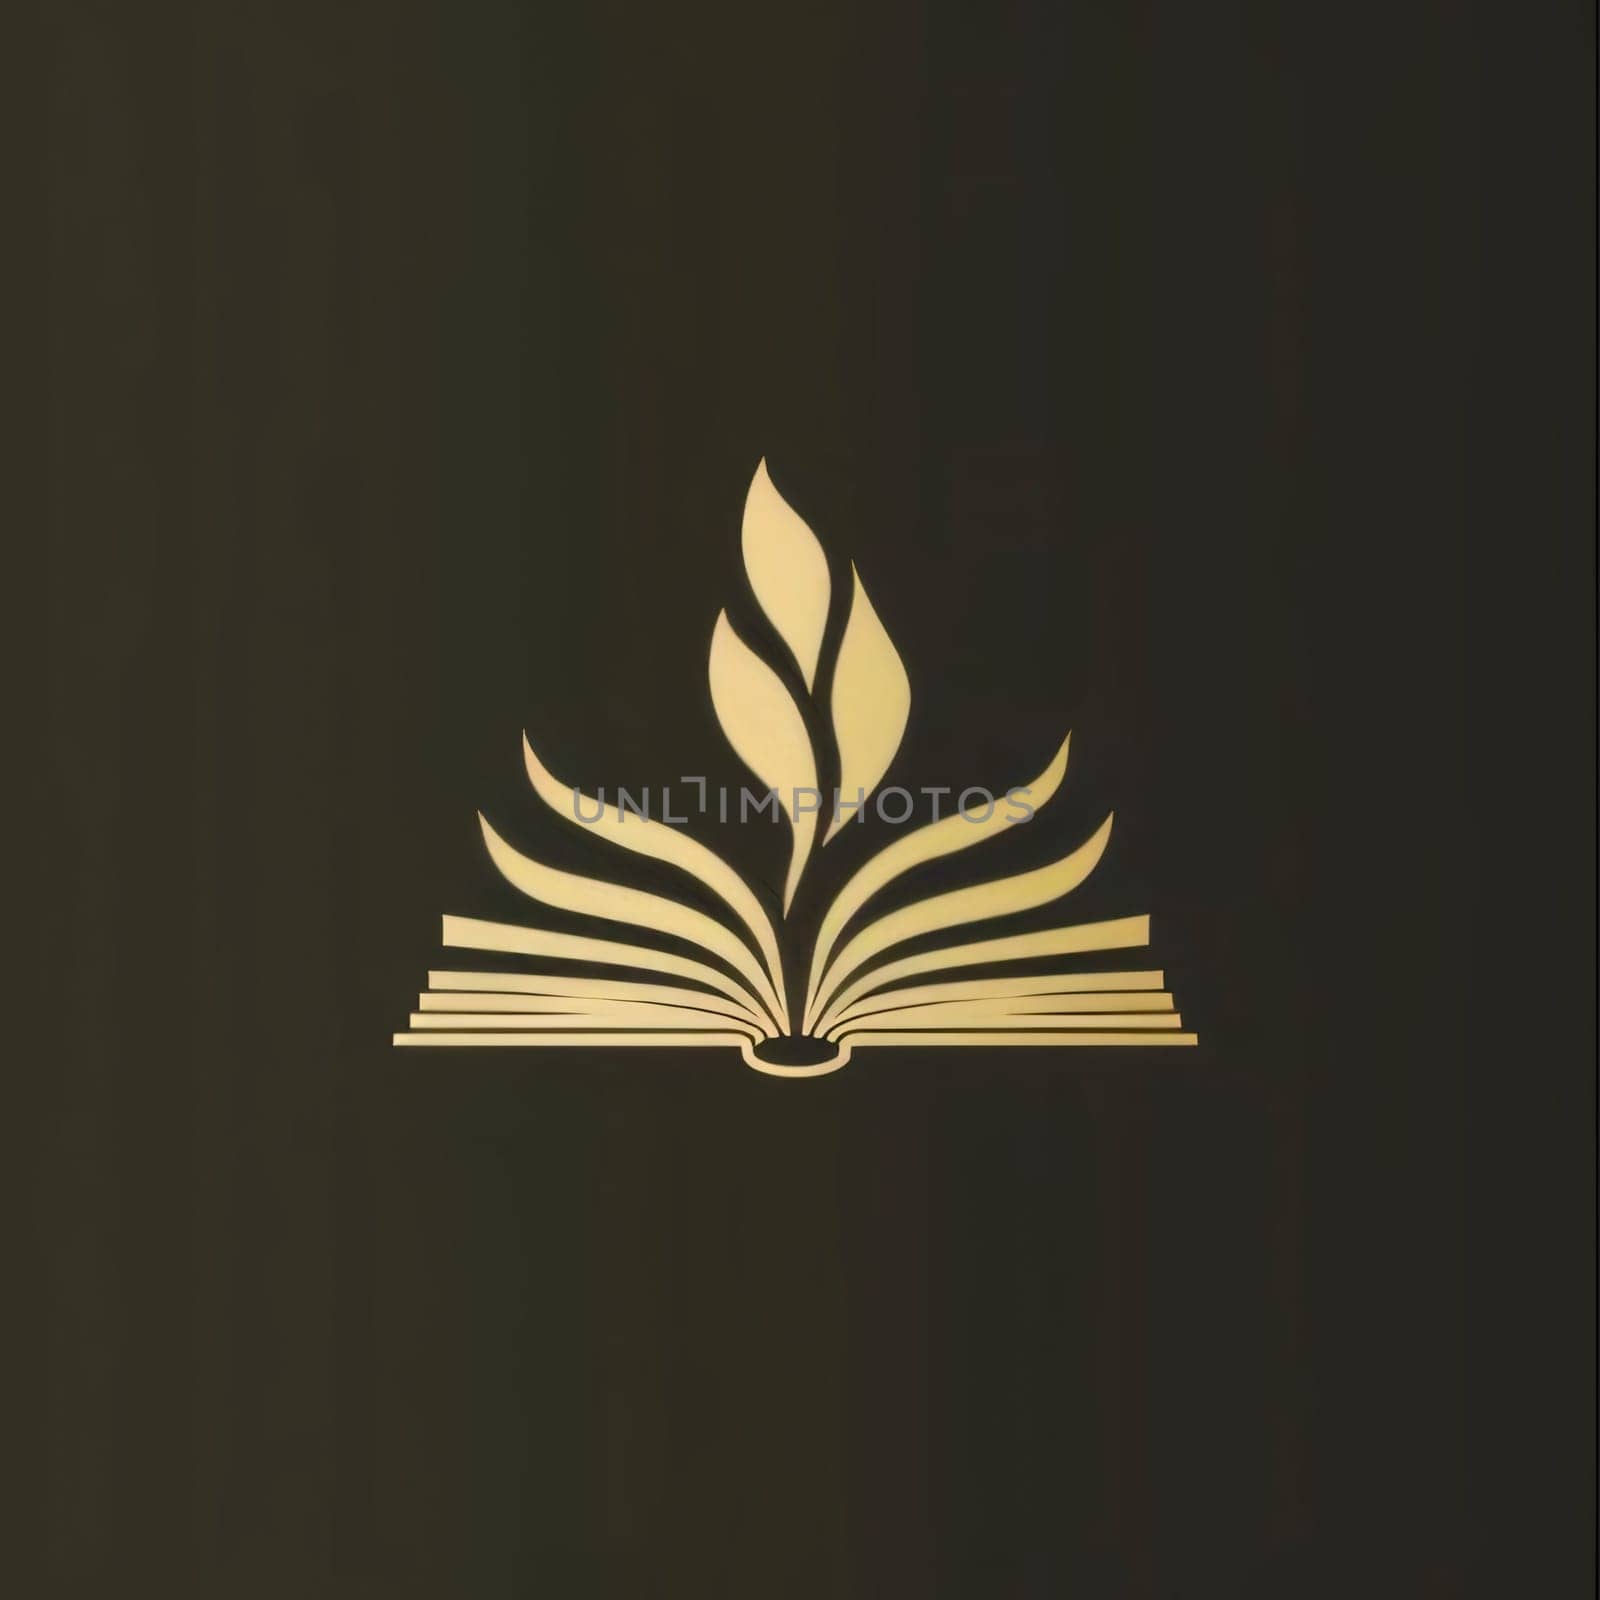 World Book Day: Golden book with leaf logo design vector template. Elegant book icon.